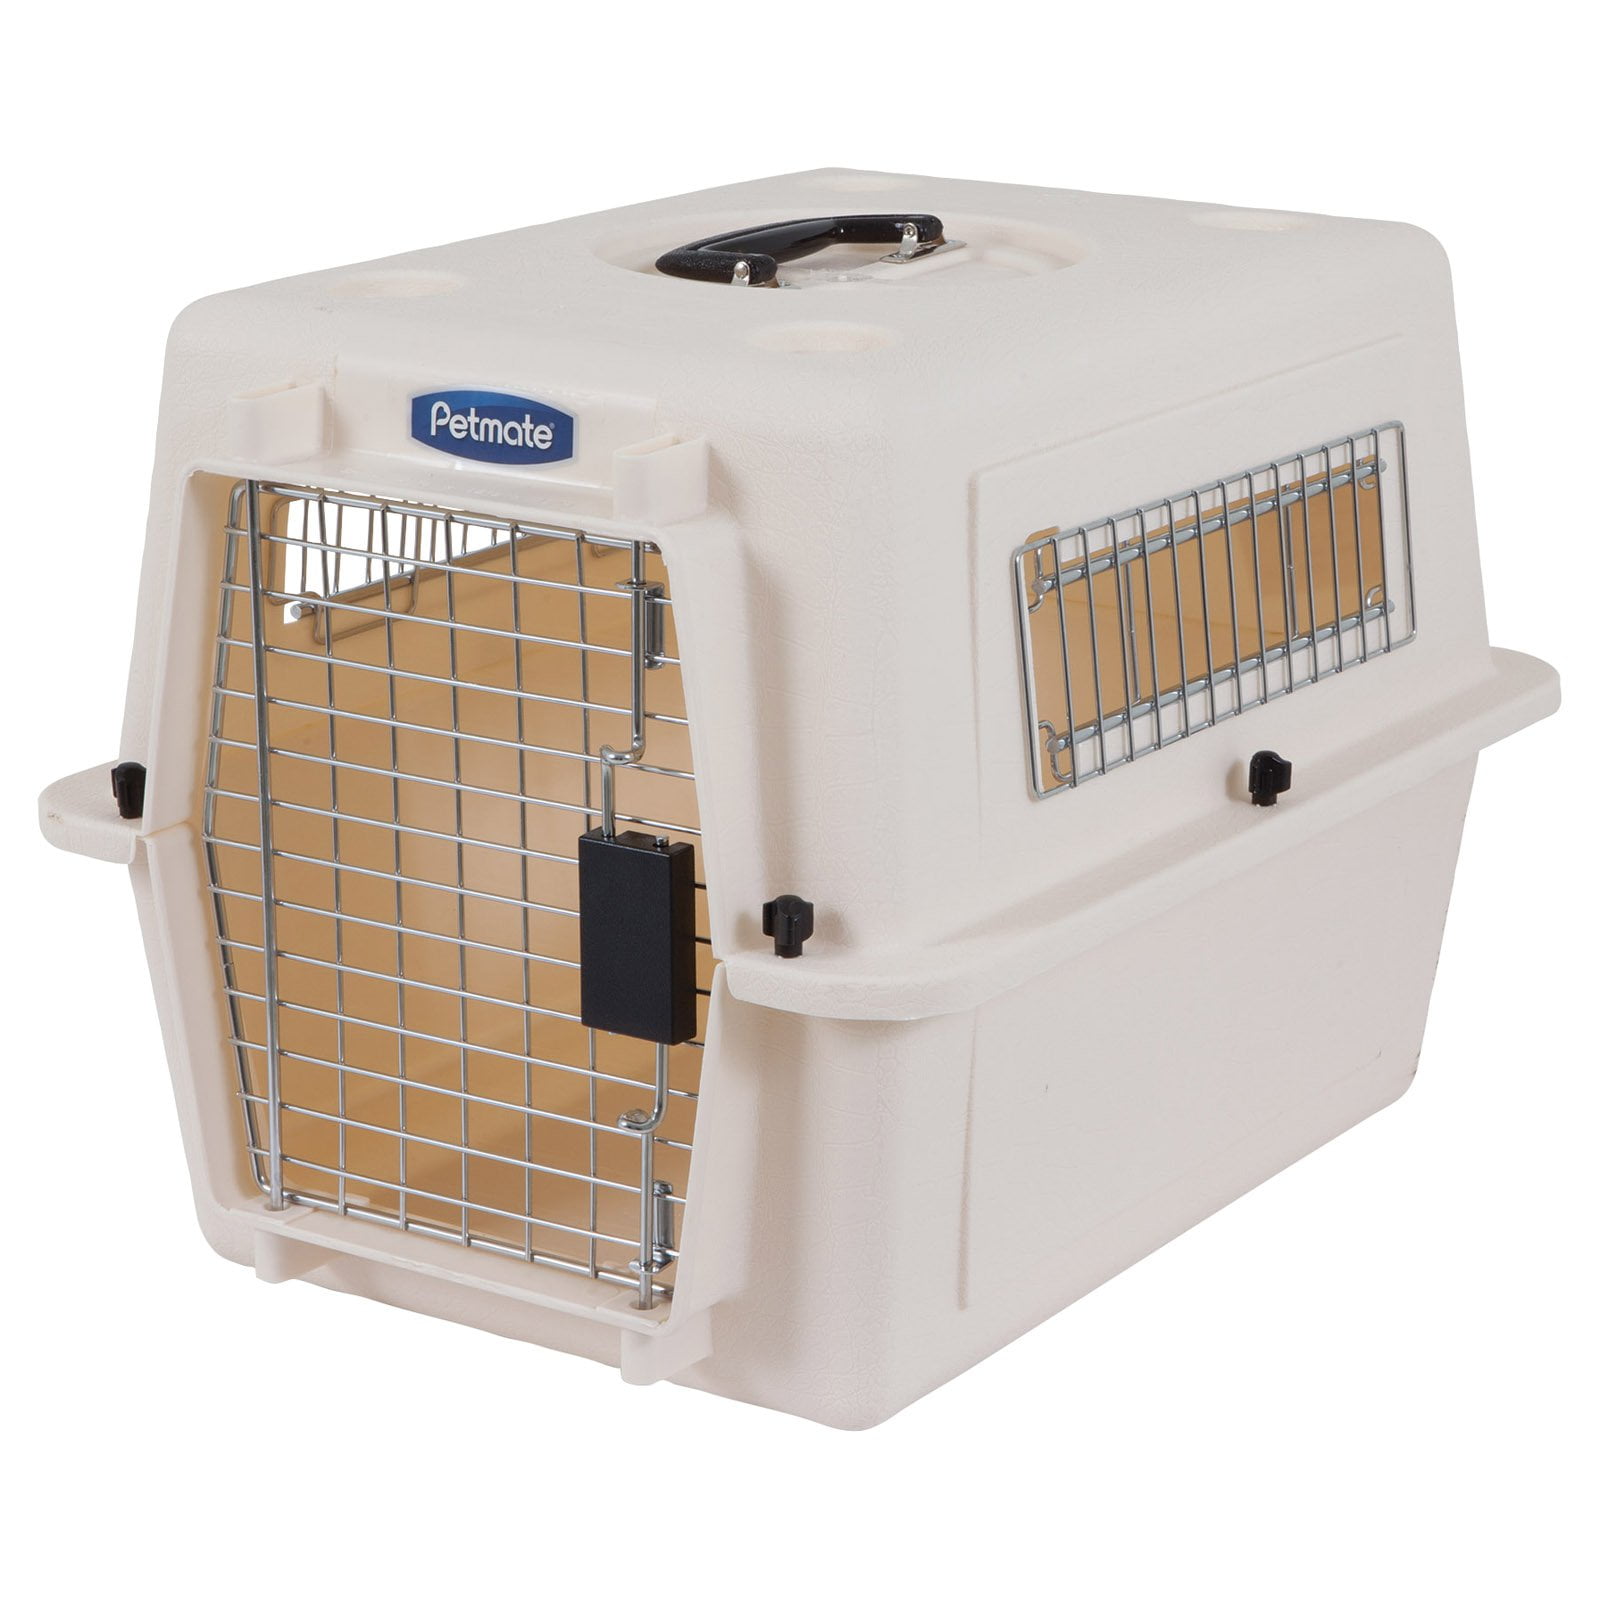 Petmate Vari Fashion Single-Door Plastic Dog Kennel, Pet Carrier, Brown,  Large, 40 inches